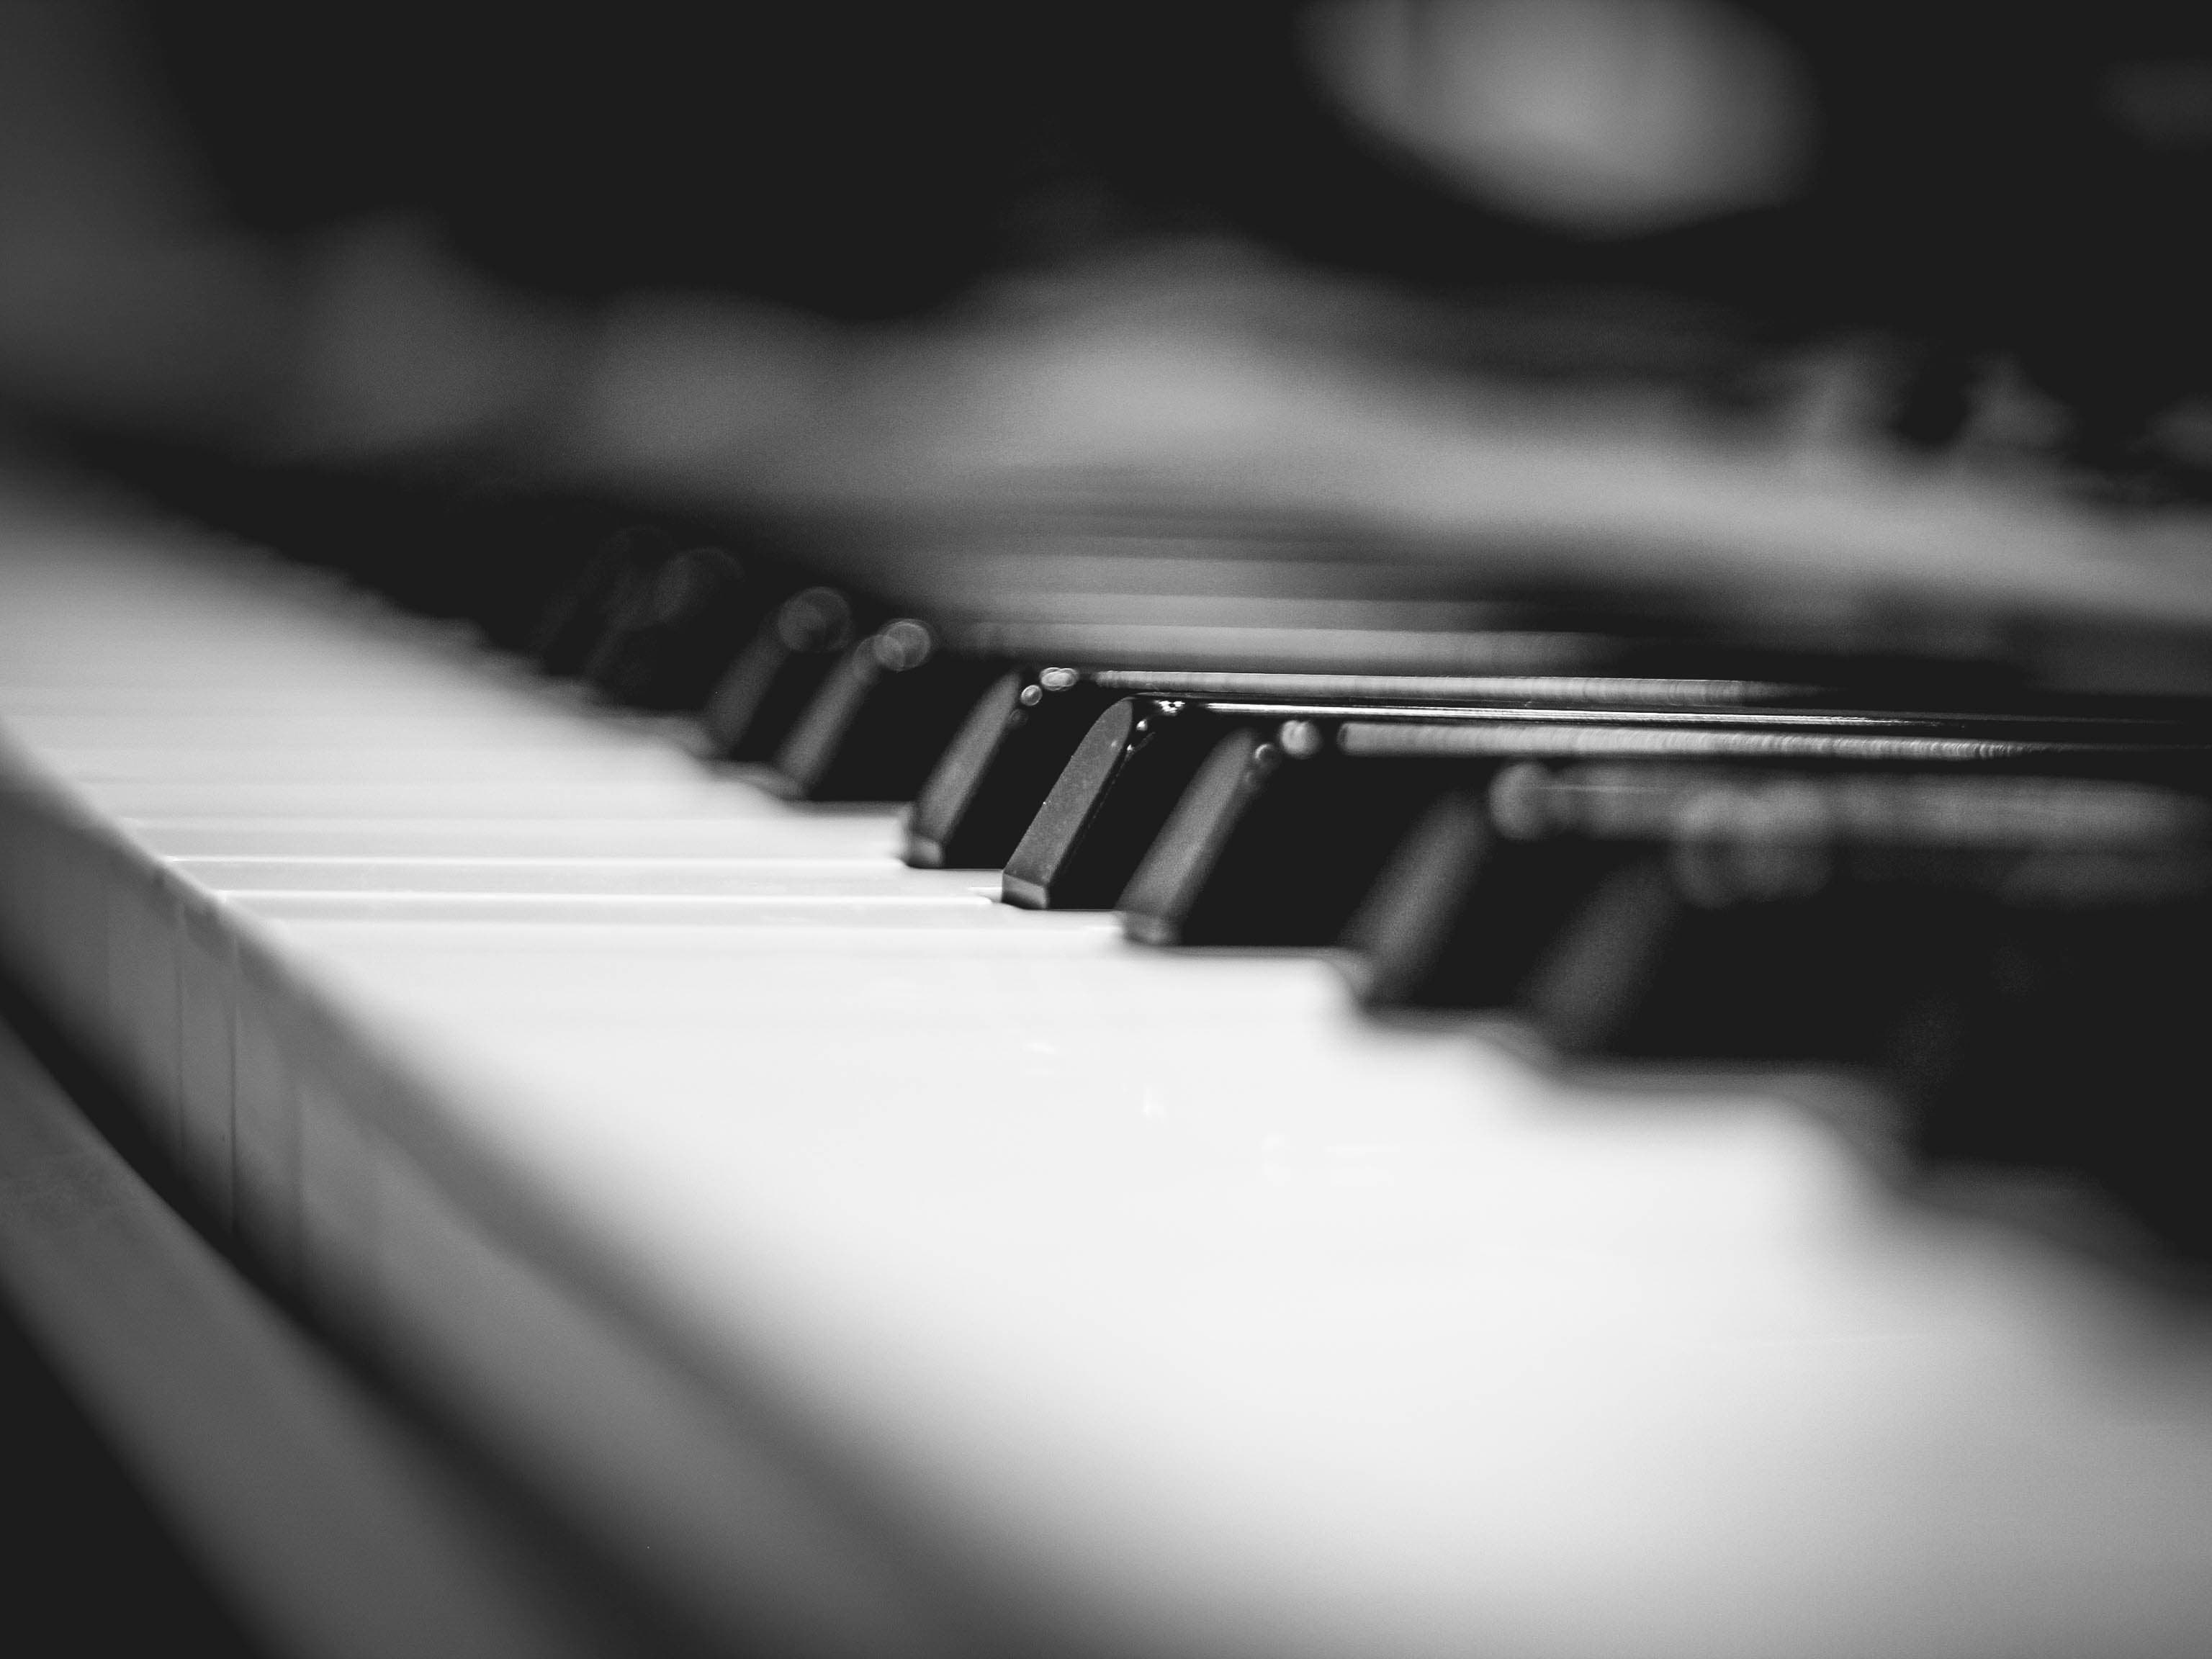 Royalty Free Dramatic Piano Music Set You'll Want To Buy